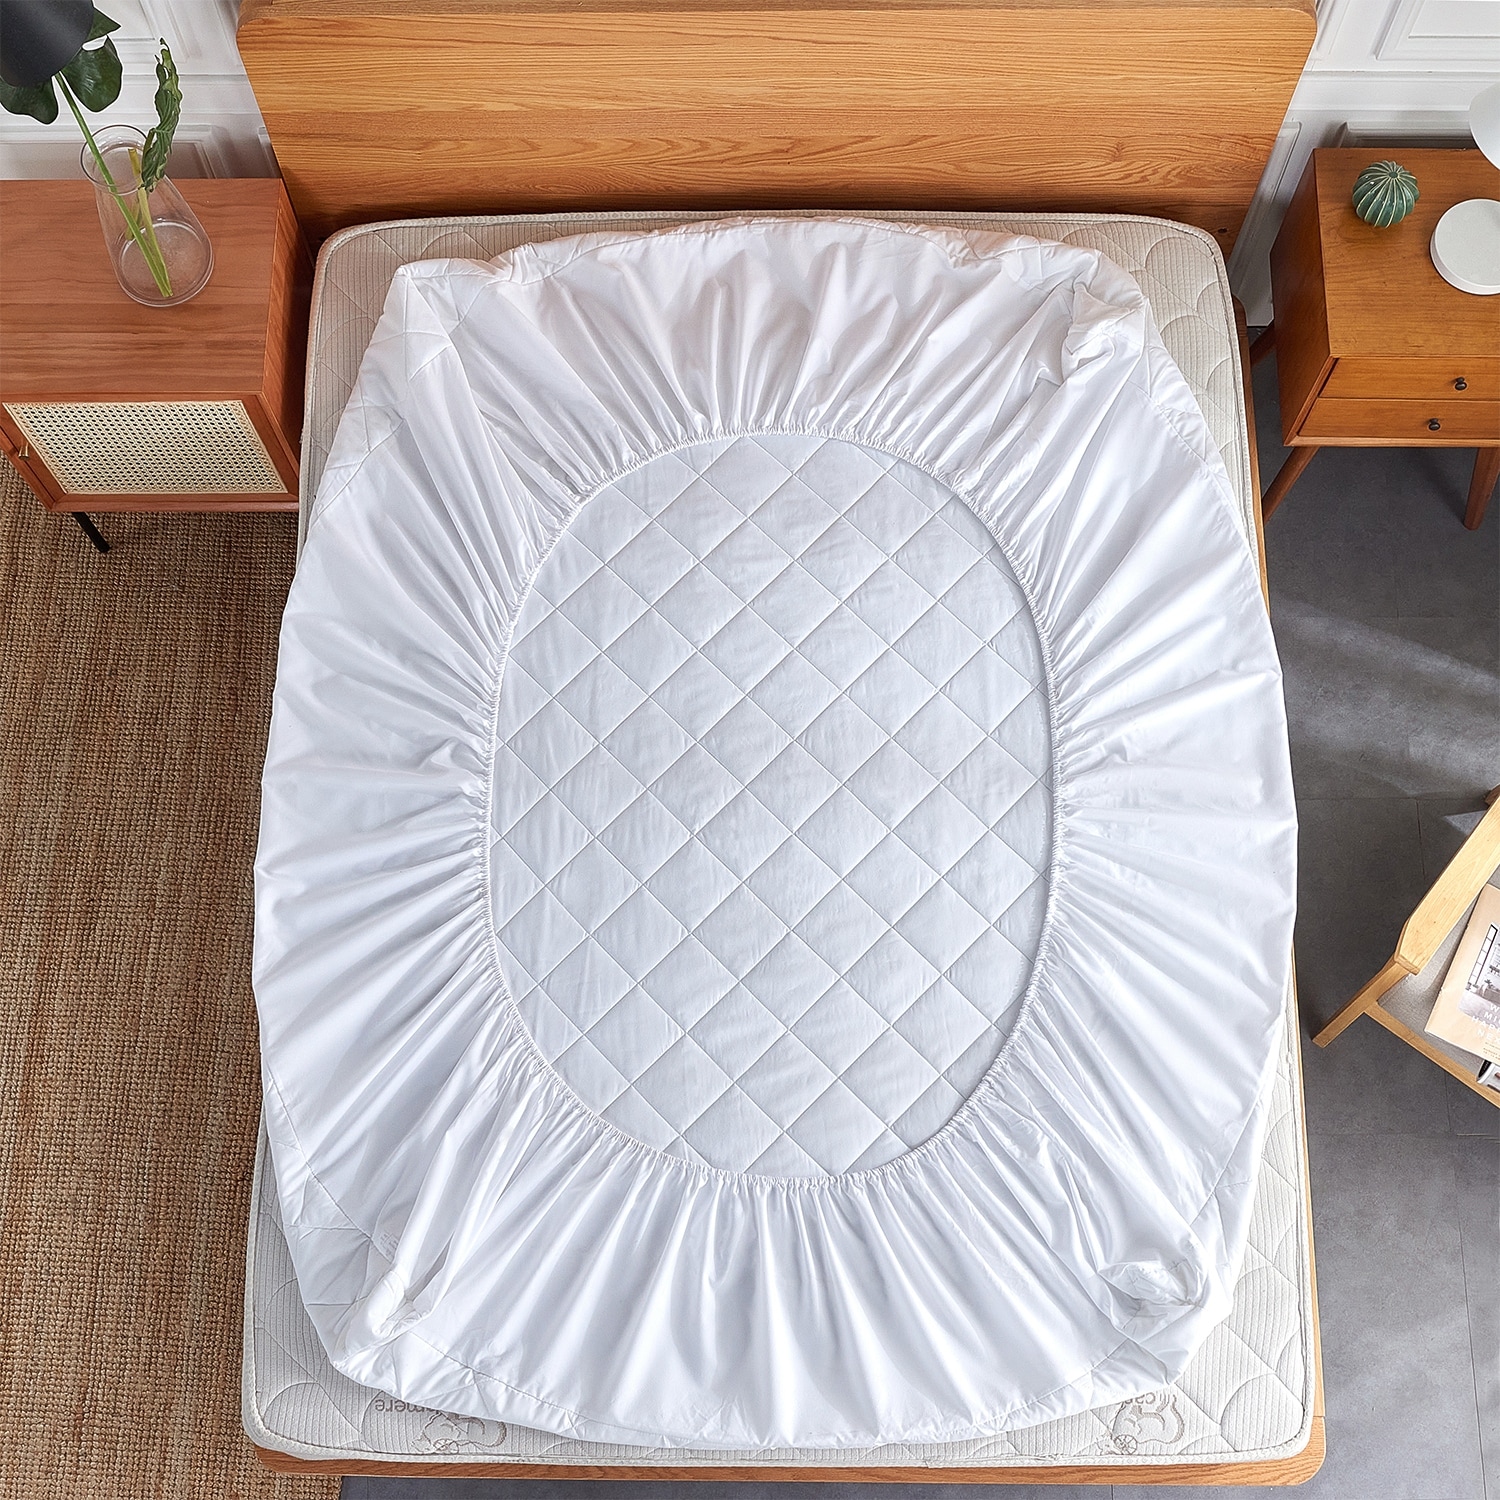 https://ak1.ostkcdn.com/images/products/is/images/direct/a4ca579efa7f733cd67bdf28898e8e9761872526/3-Layer-Quilted-Waterproof-Mattress-Pad-Hypoallergenic-Protector-Cover.jpg